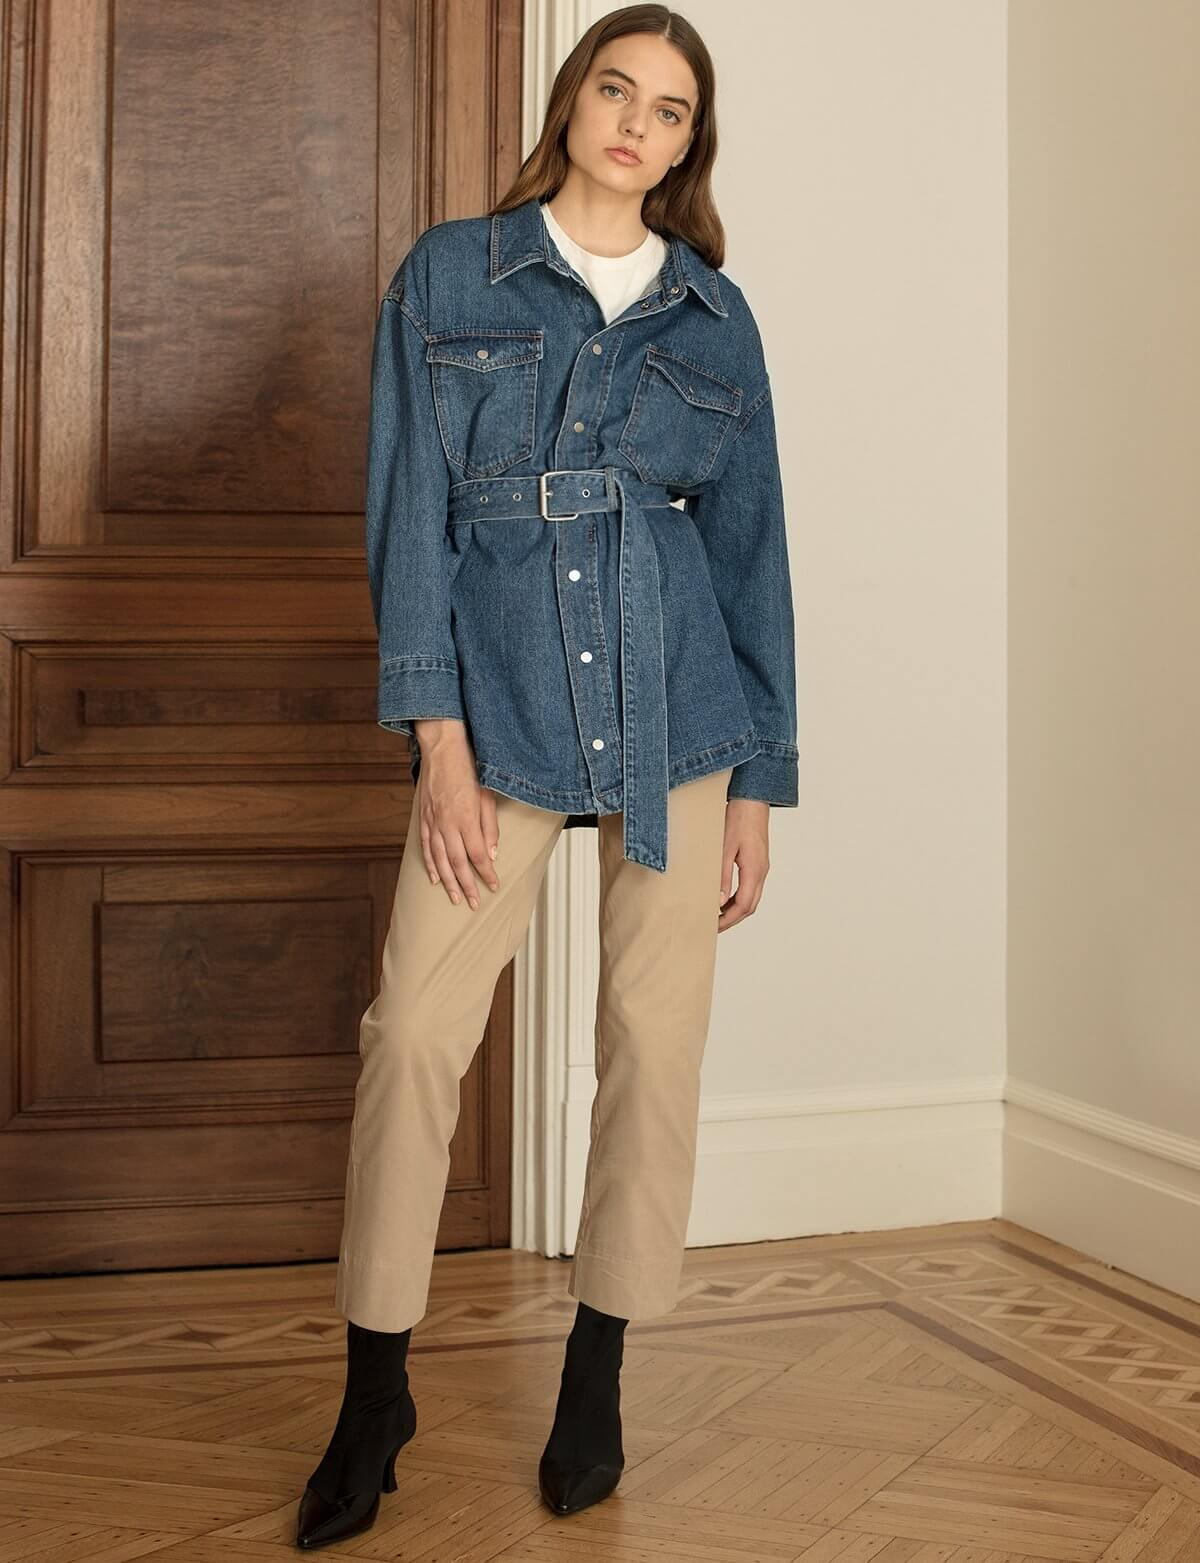 Unexpected Denim Pieces You'll Want To Add To Your Fall Wardrobe